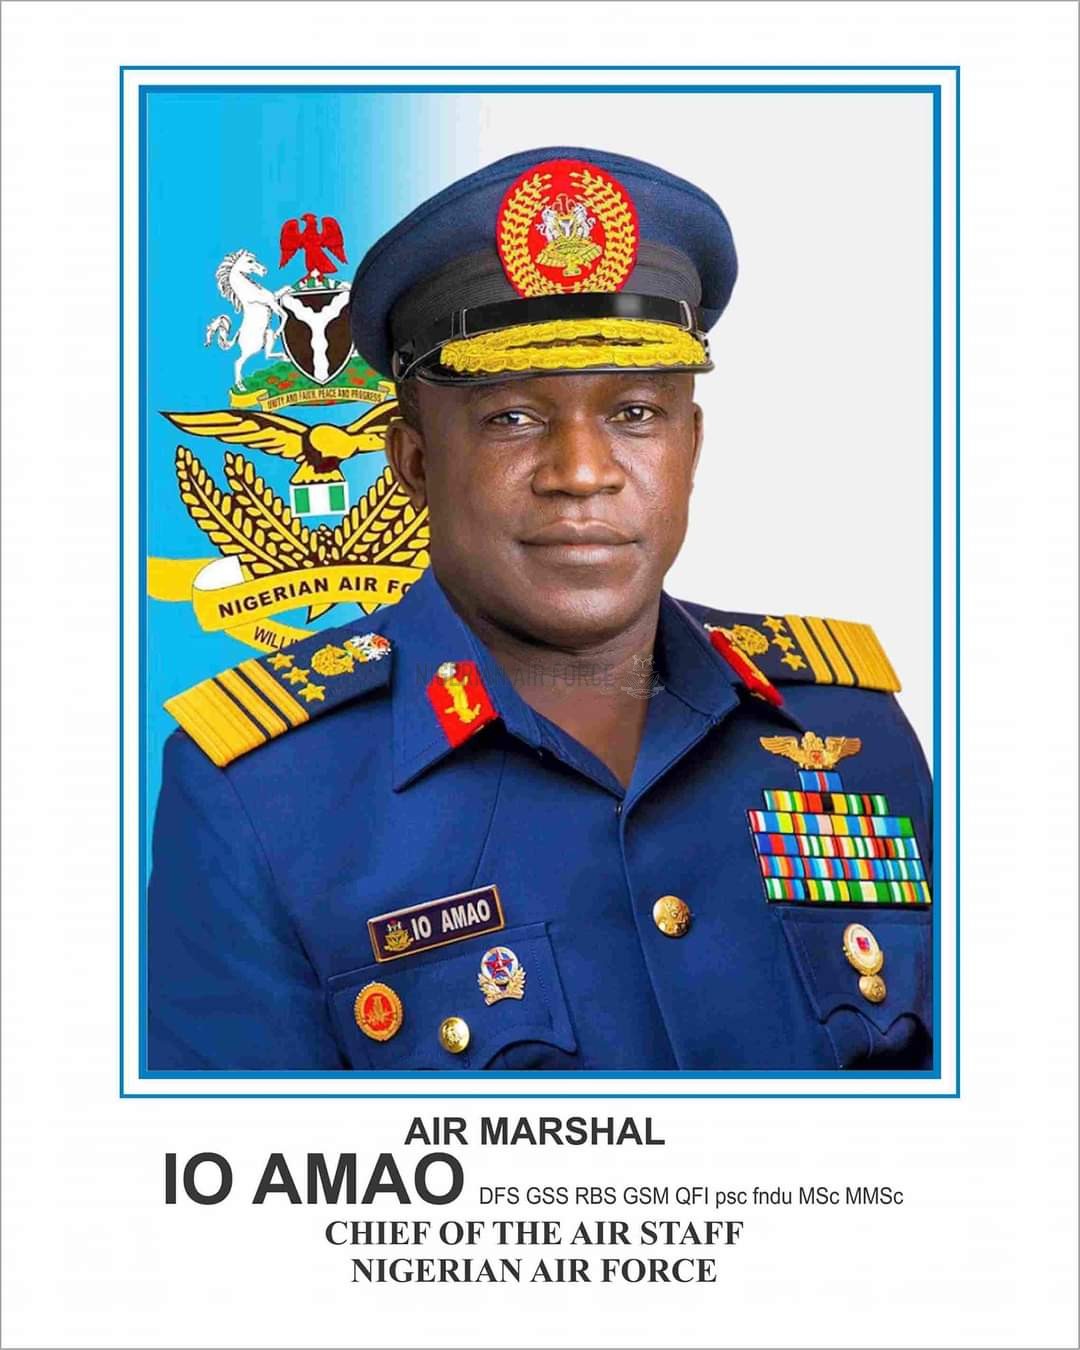 OFFICIAL PORTRAIT OF AIR MARSHAL IO AMAO, THE 21ST CHIEF OF THE AIR STAFF